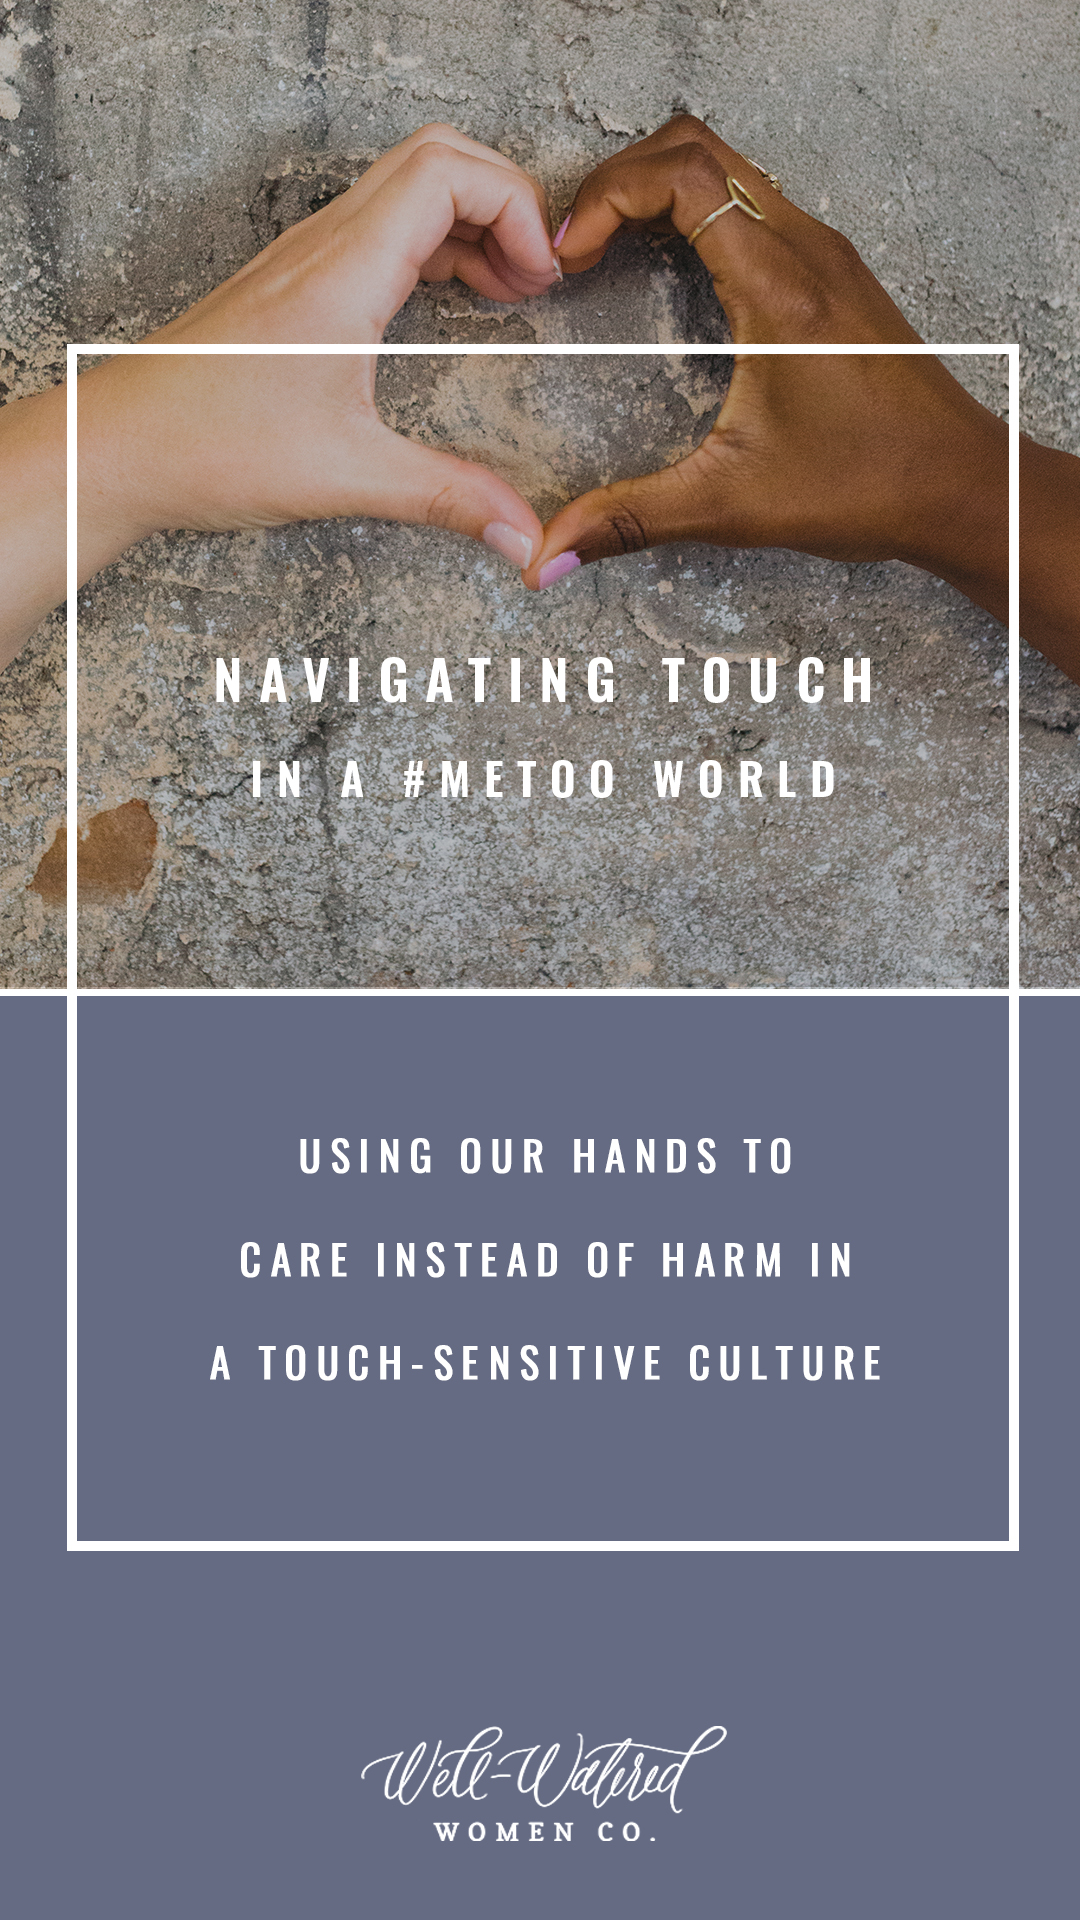 Well Watered Women Blog-Navigating Touch in a #MeToo World